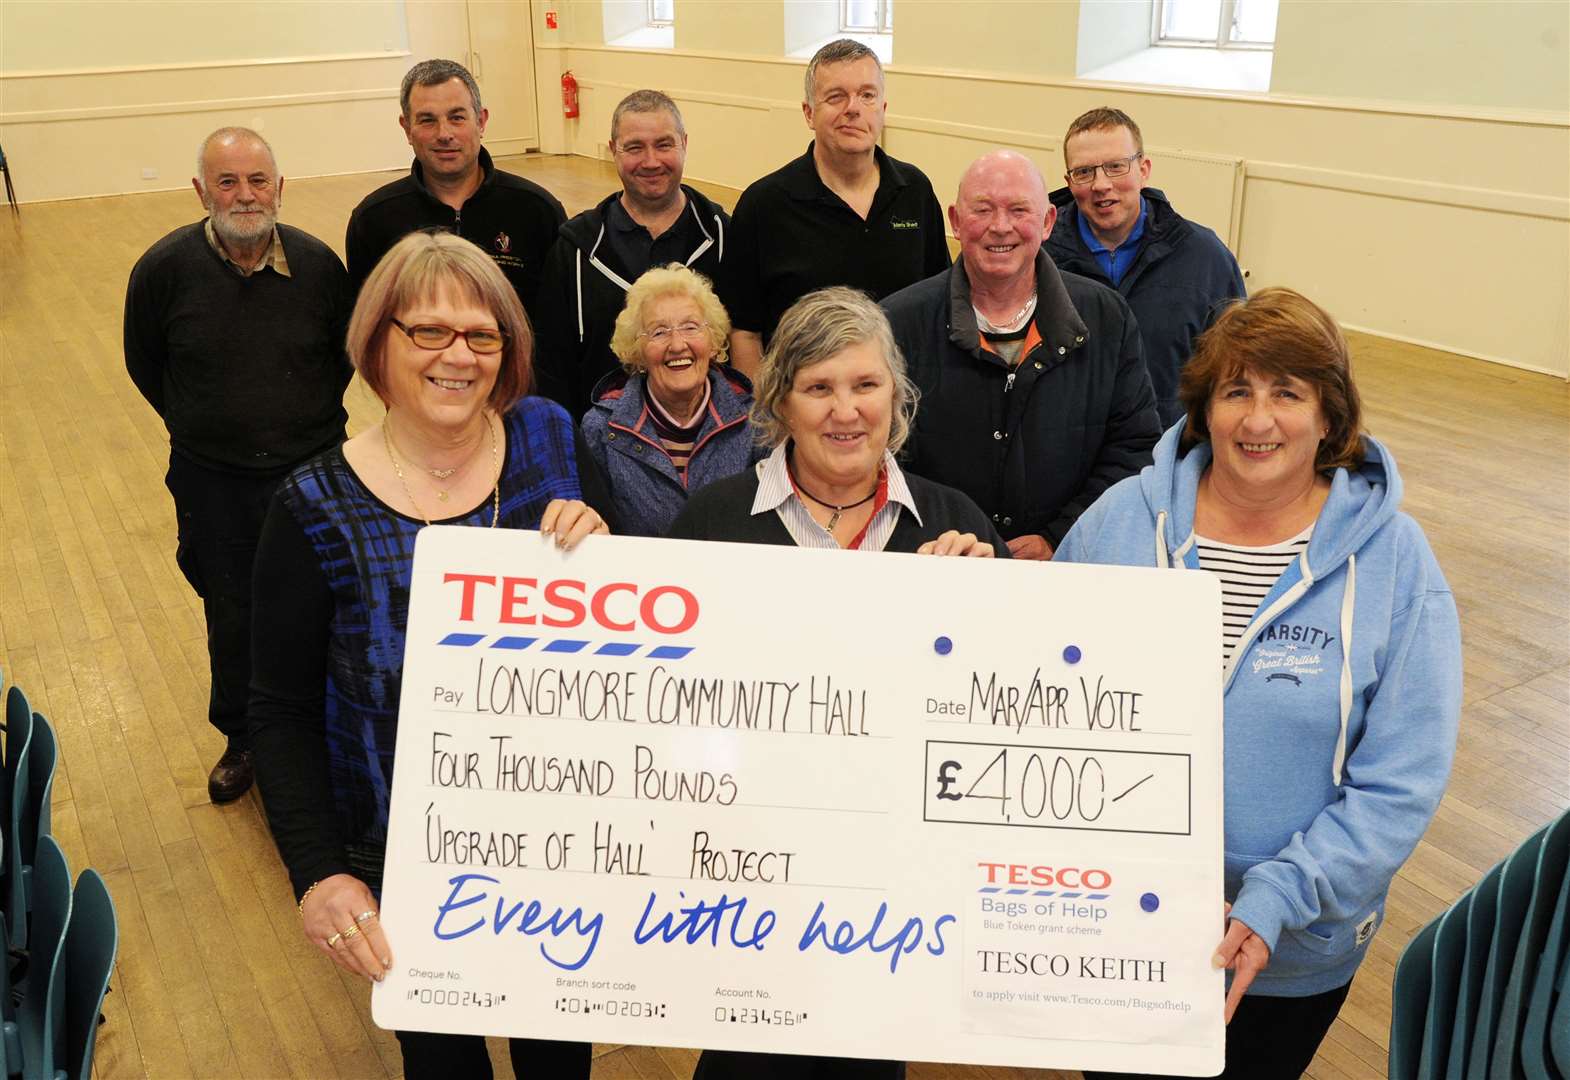 Tesco Service Manager Pat Allsop (centre) hands over a cheque for £4,000 to Longmore Hall Committee's chairwoman Rhona Paterson (right) and treasurer Linda Morrison. Other committee members stand behind. Picture: Eric Cormack. Image No. 044175.